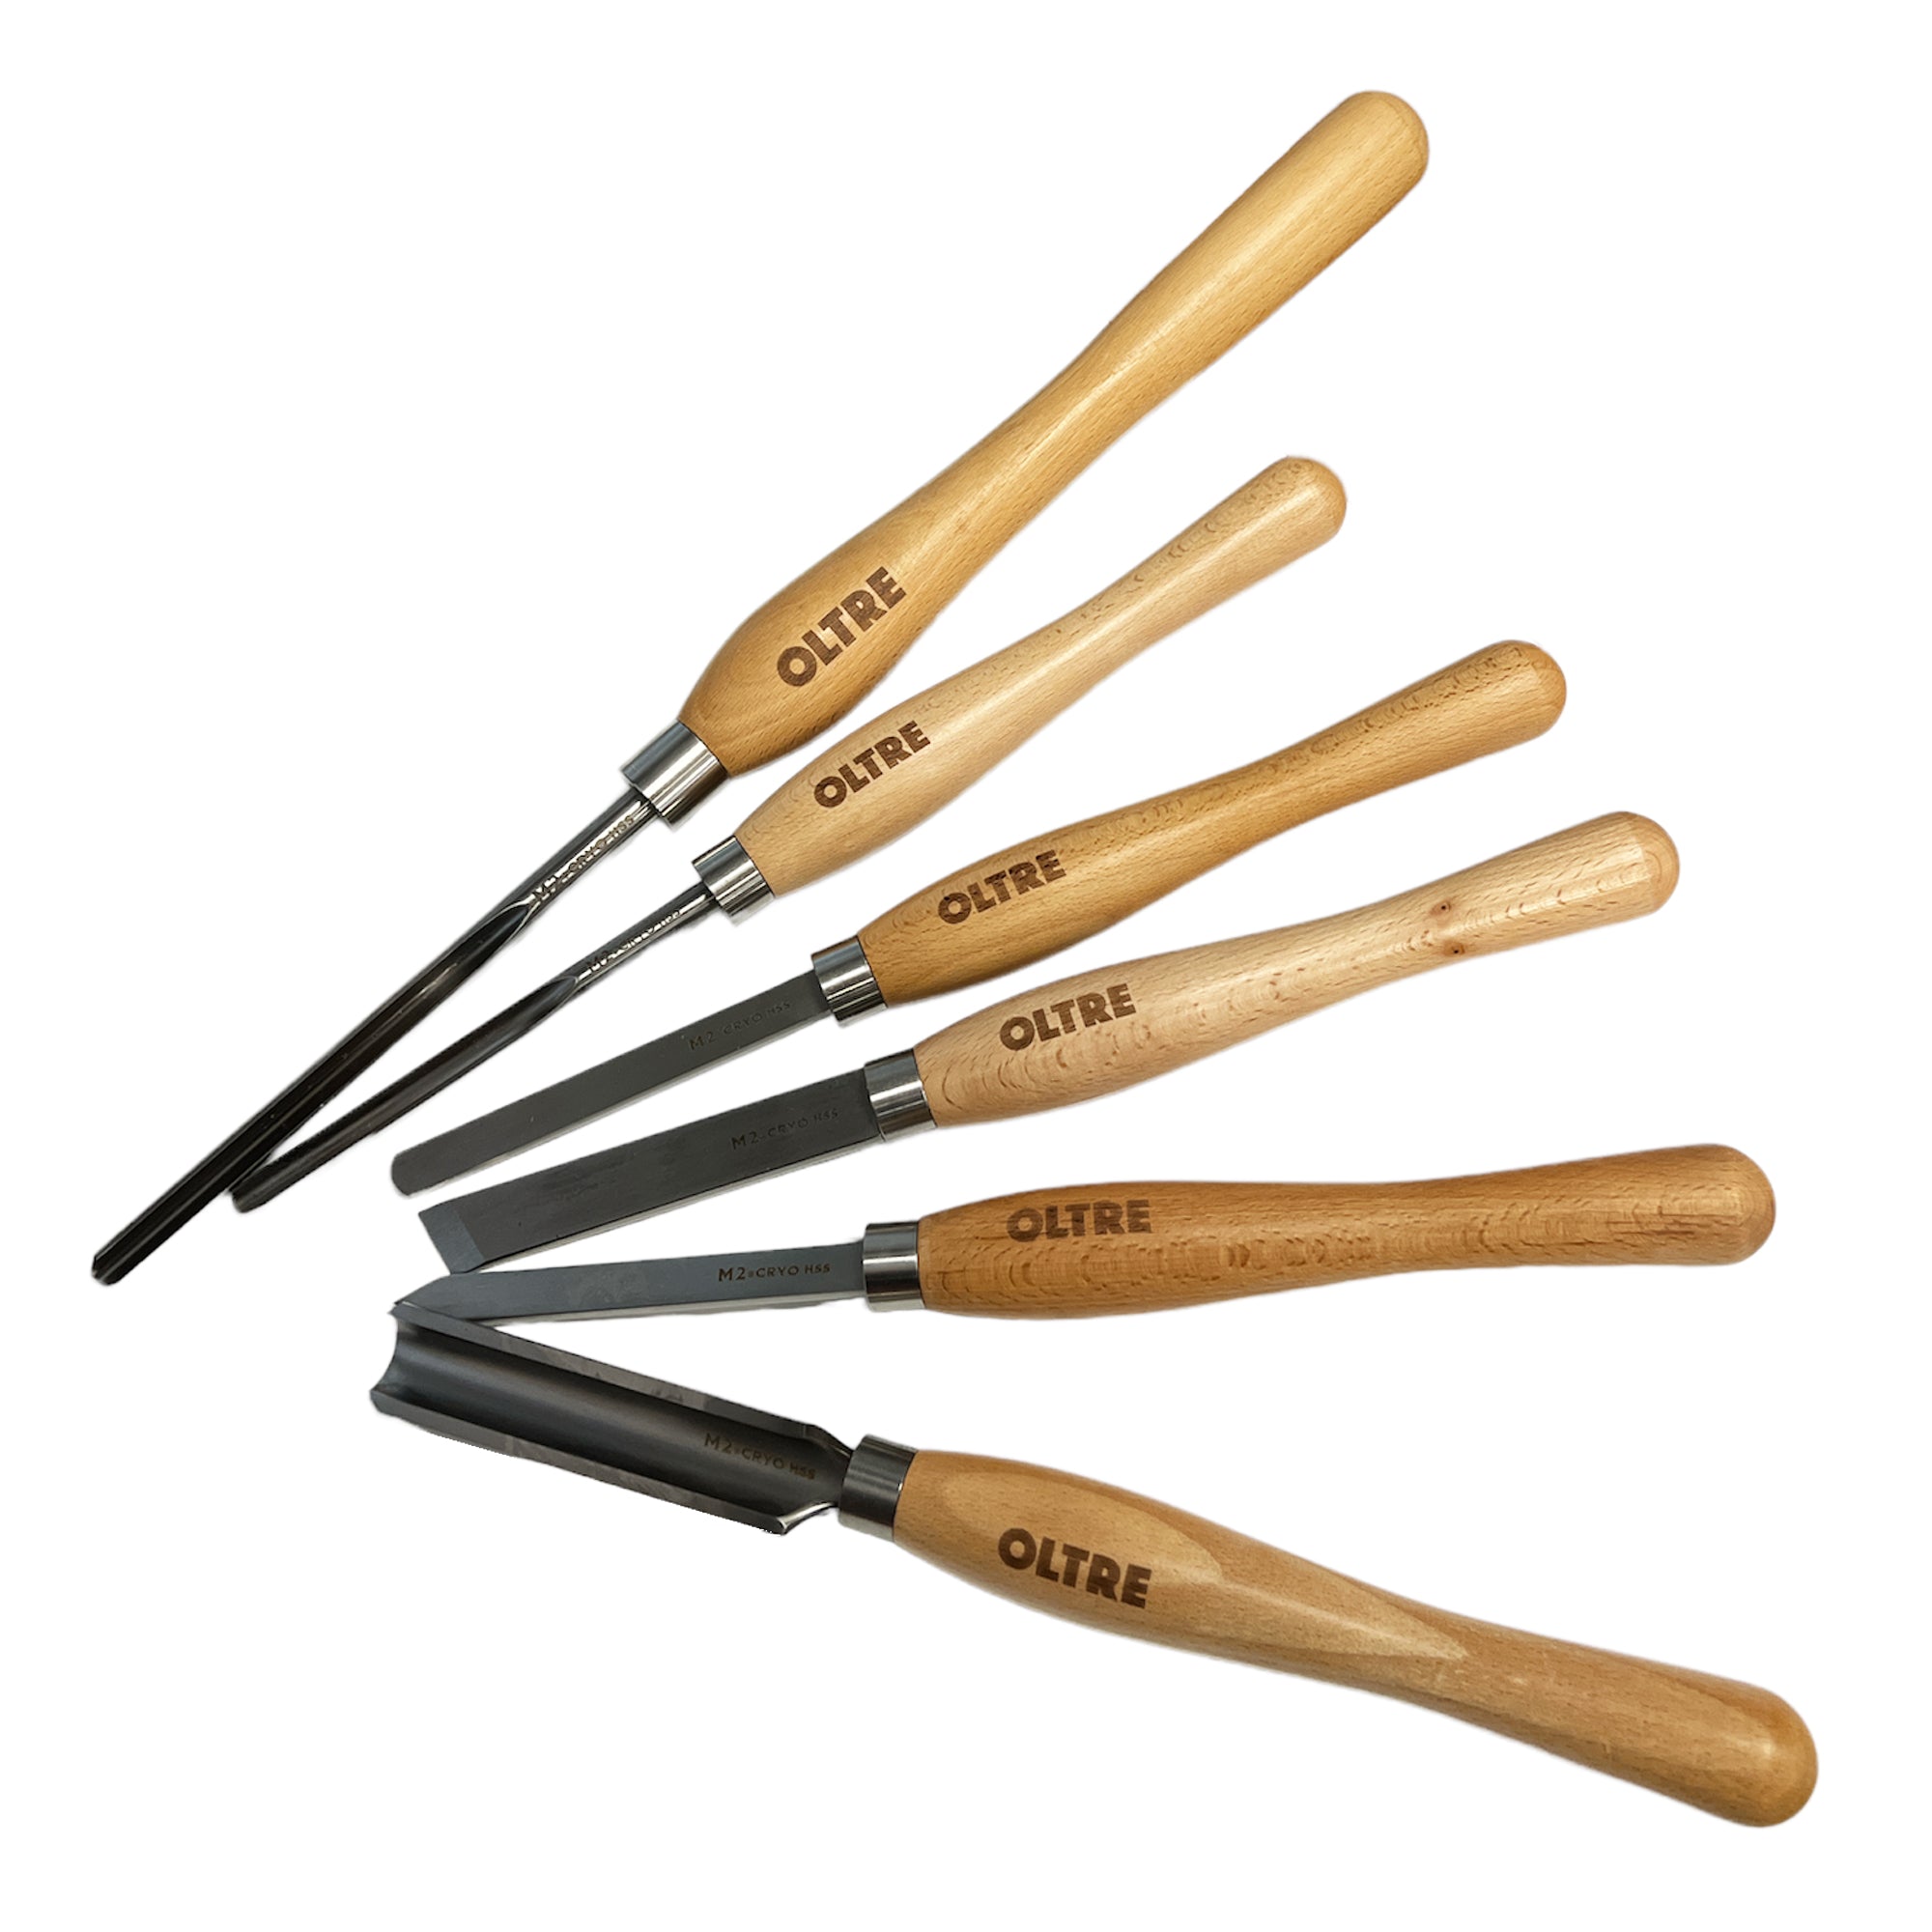 6Pce Woodturning Chisel Tool M2 CRYO HSS (5 Small + 1 Medium Turning Tool) Set by Oltre